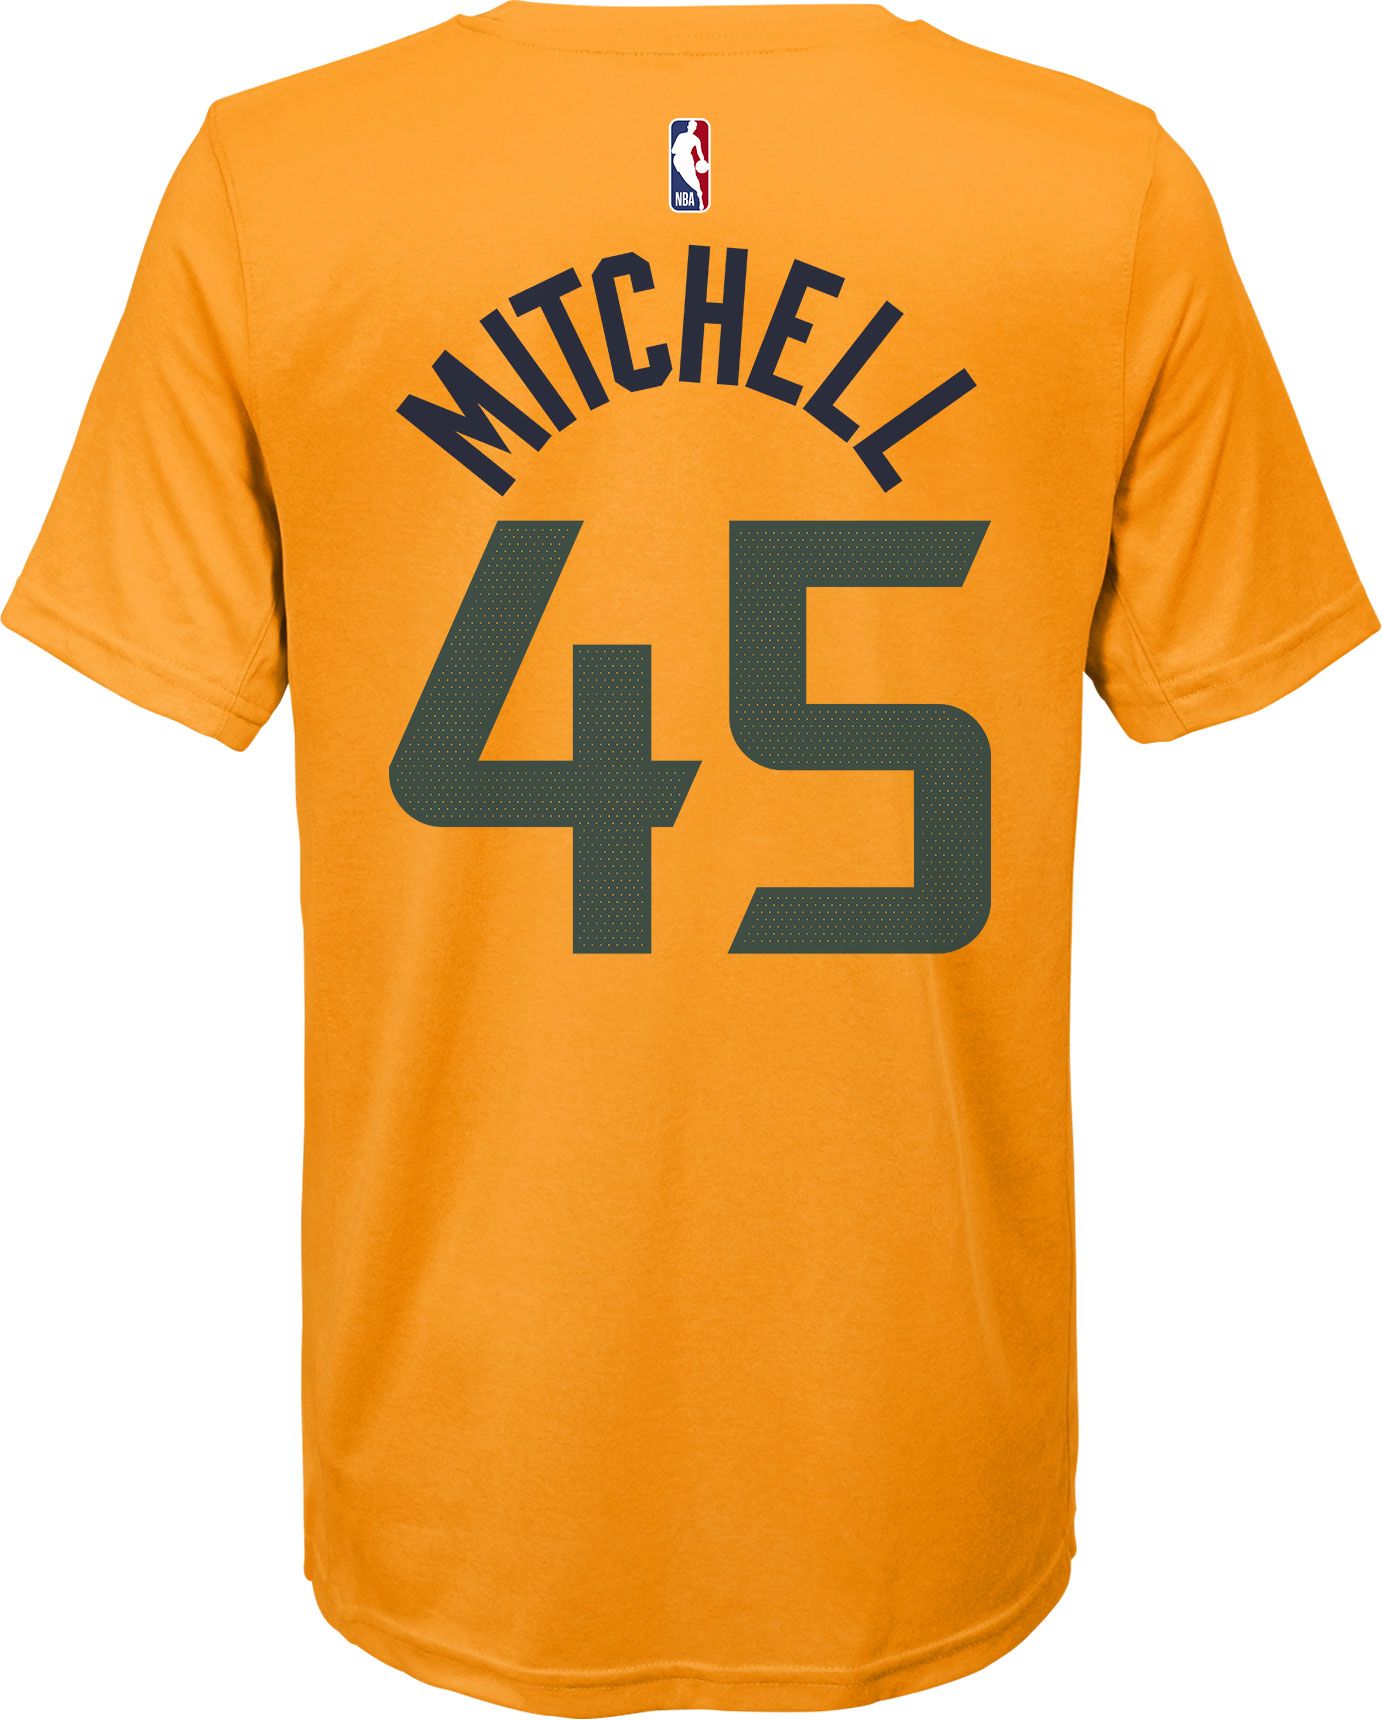 Donovan Mitchell Jerseys  Curbside Pickup Available at DICK'S